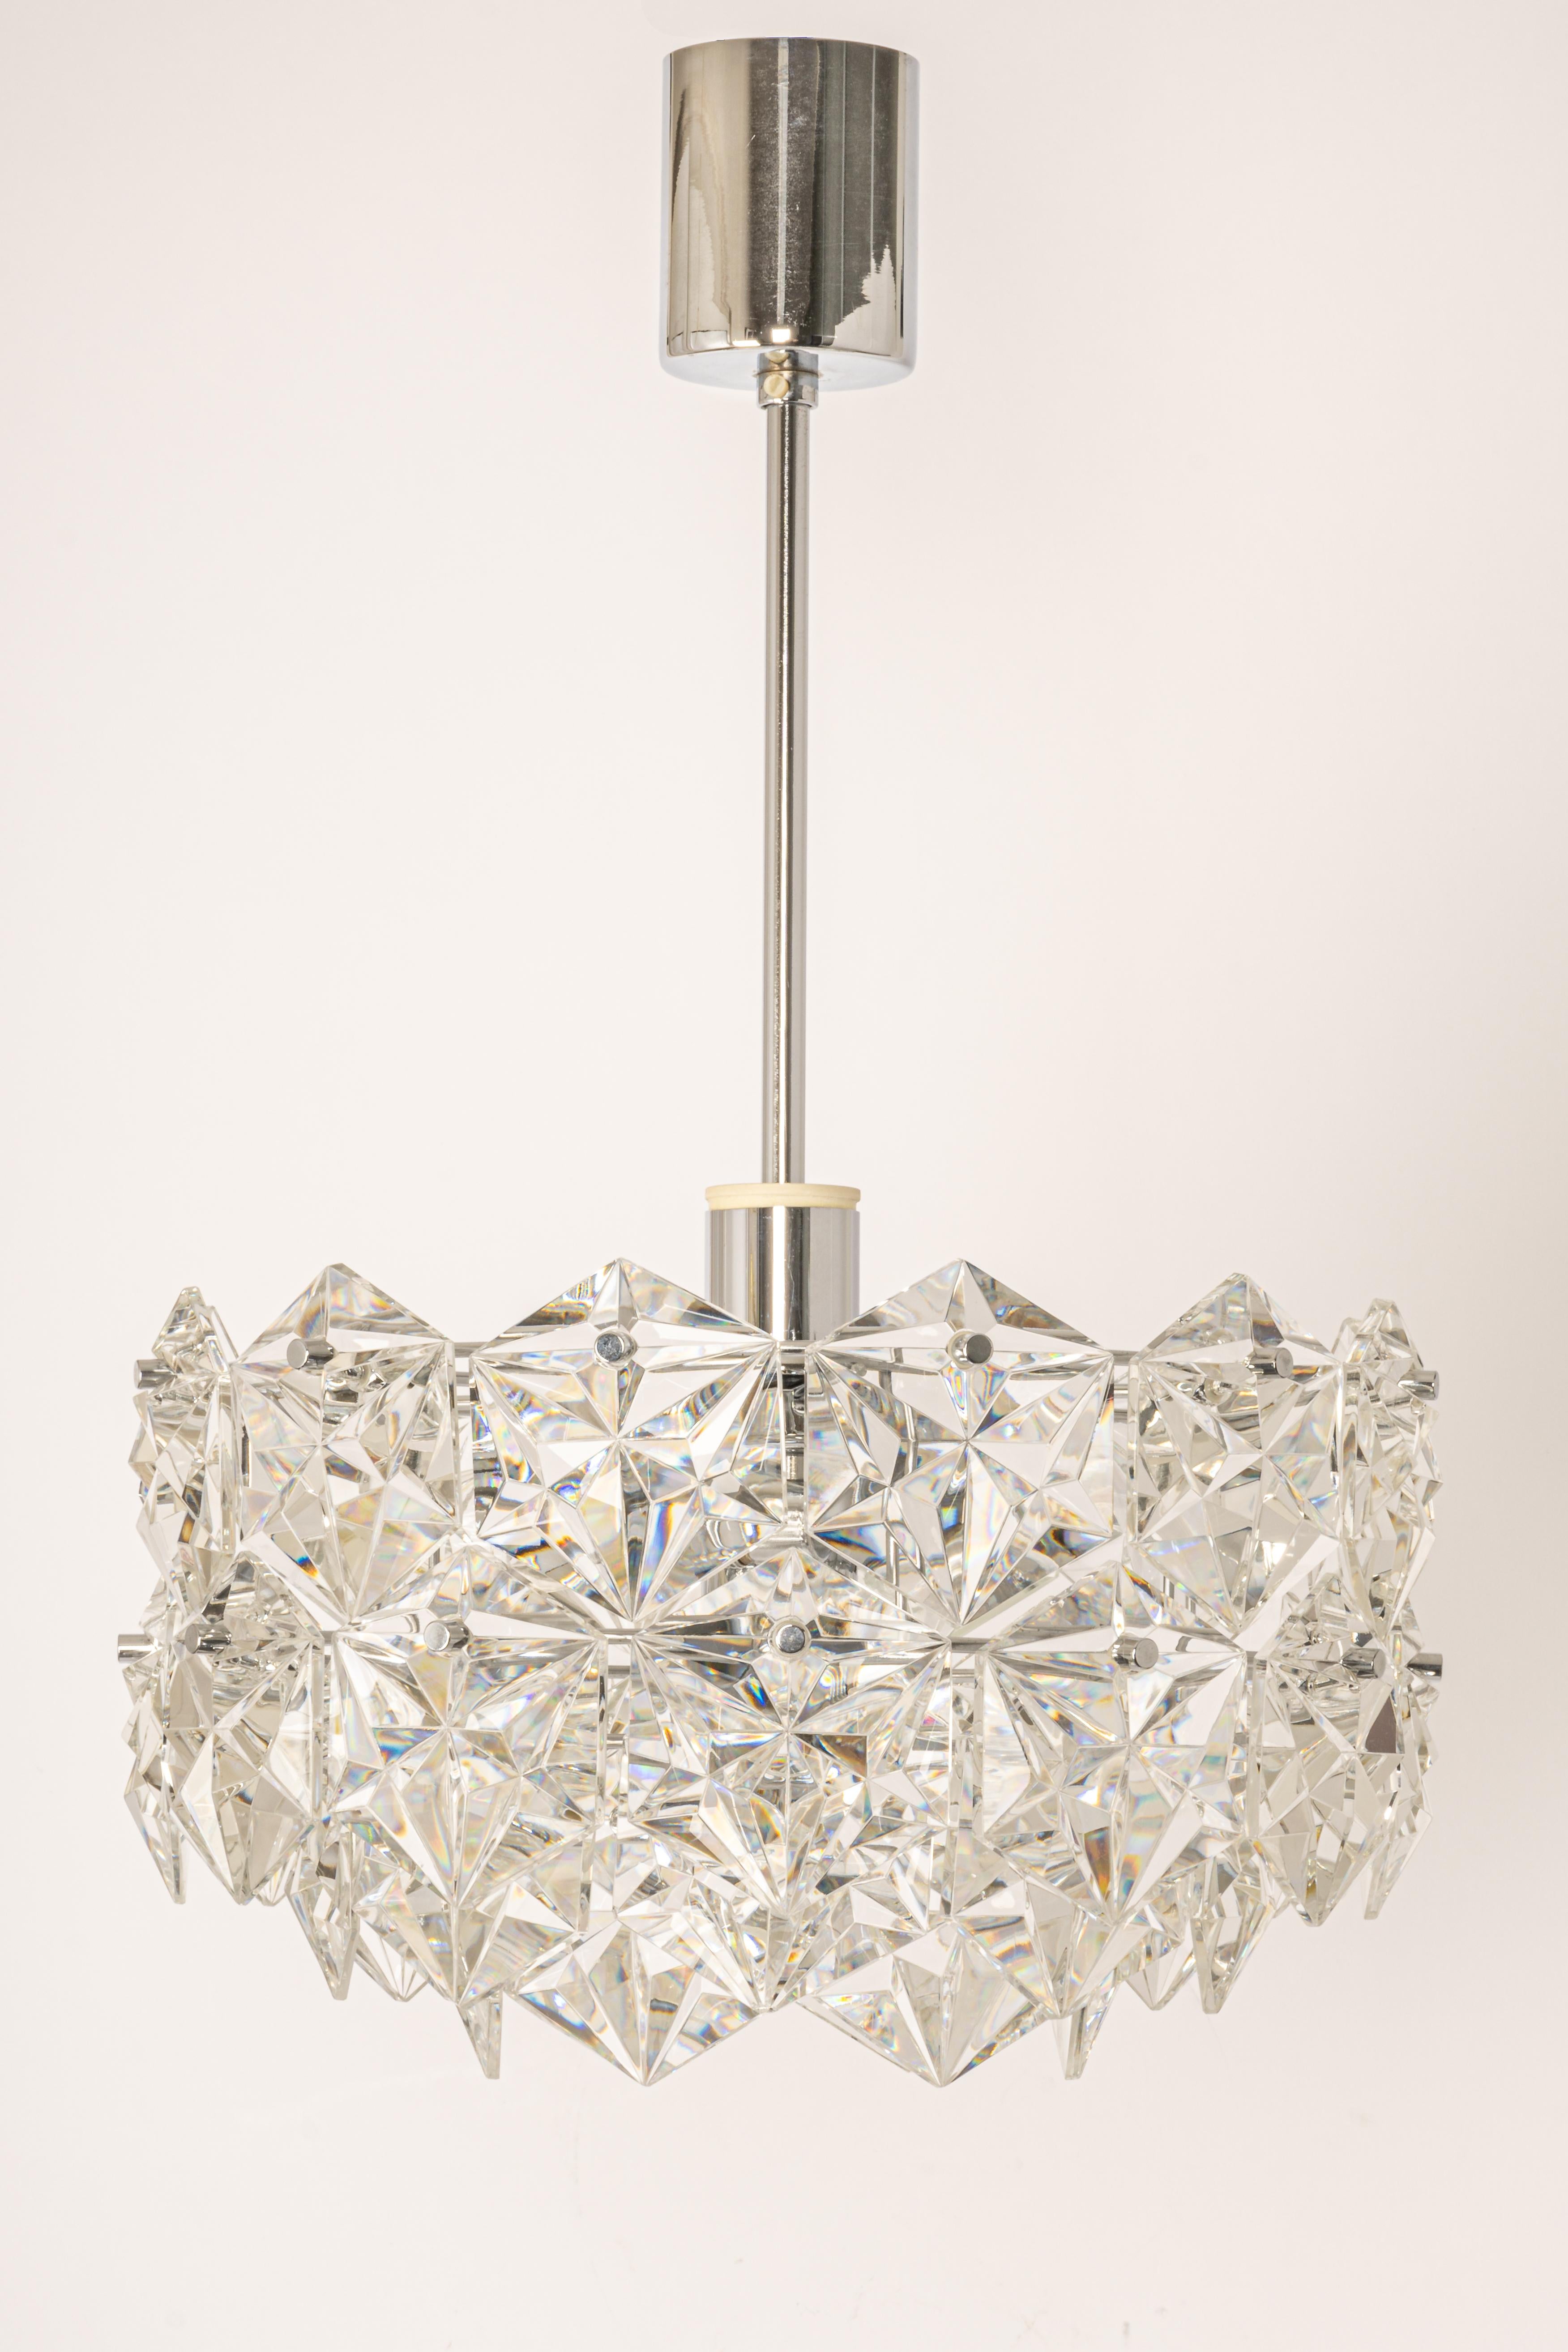 A stunning three-tier petite pendant light by Kinkeldey, Germany, manufactured in circa 1970-1979. A handmade and high quality piece. The ceiling fixture and the frame are made of chrome and have 3 rings with lots of facetted crystal glass